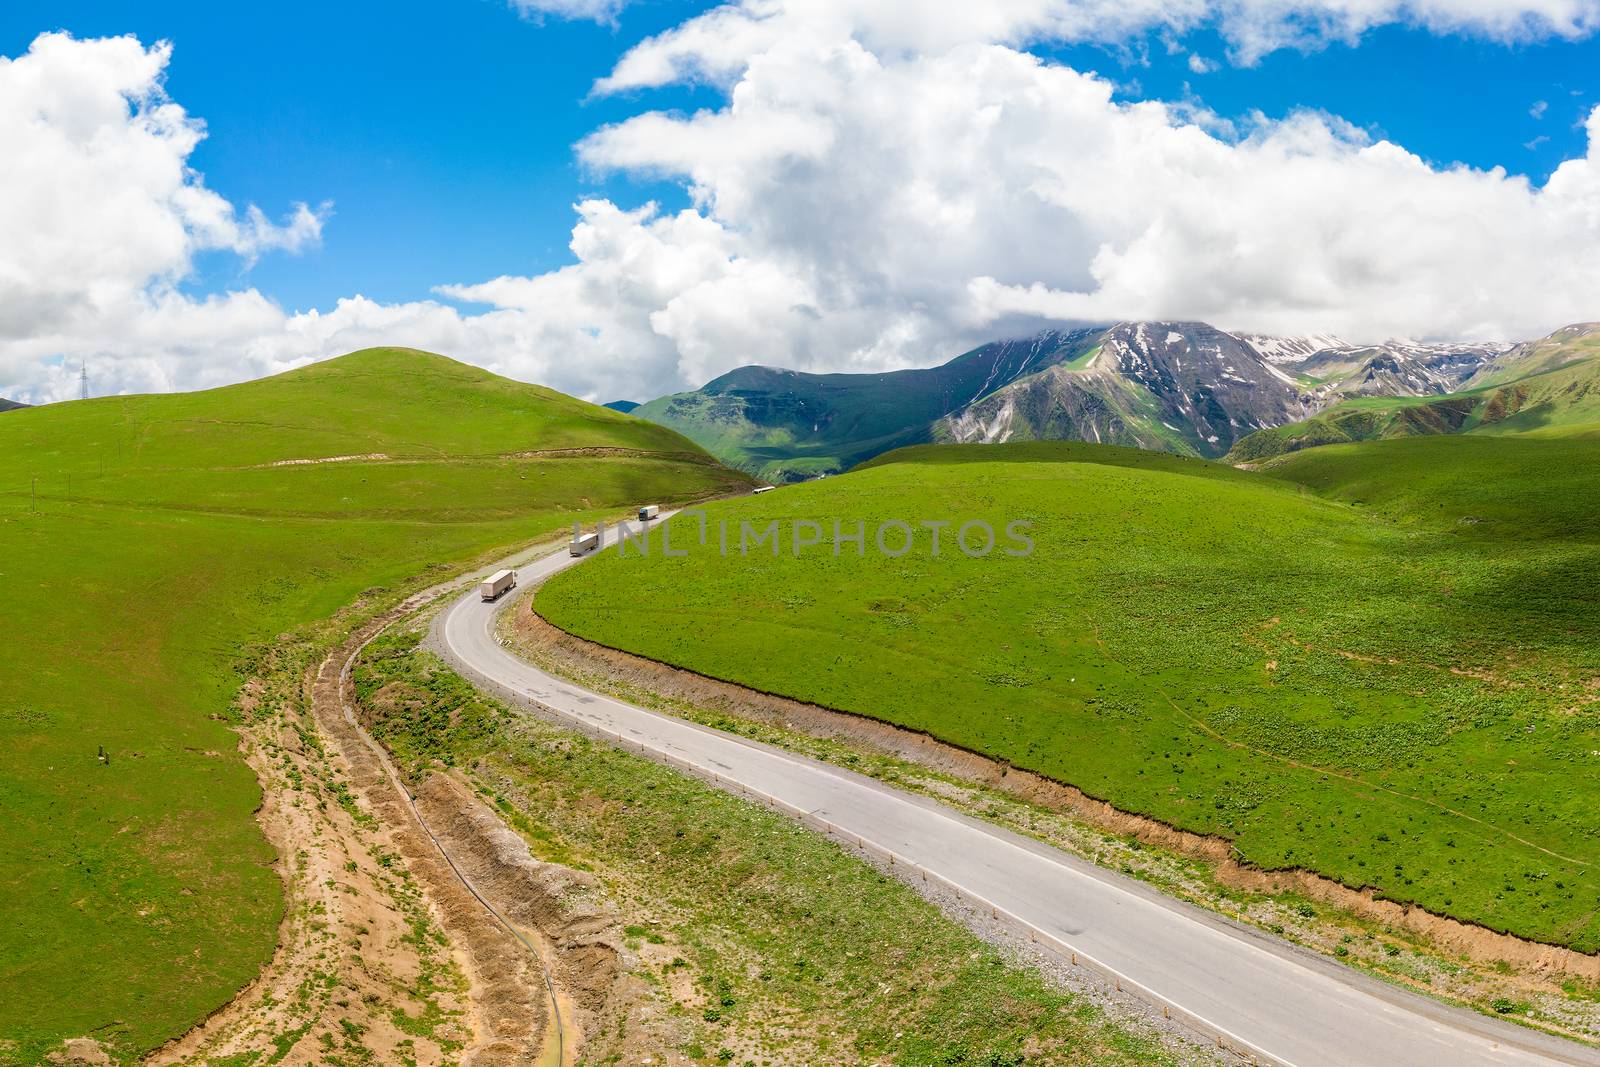 Wagons on a mountain road, scenic landscape from quadrocopter top view